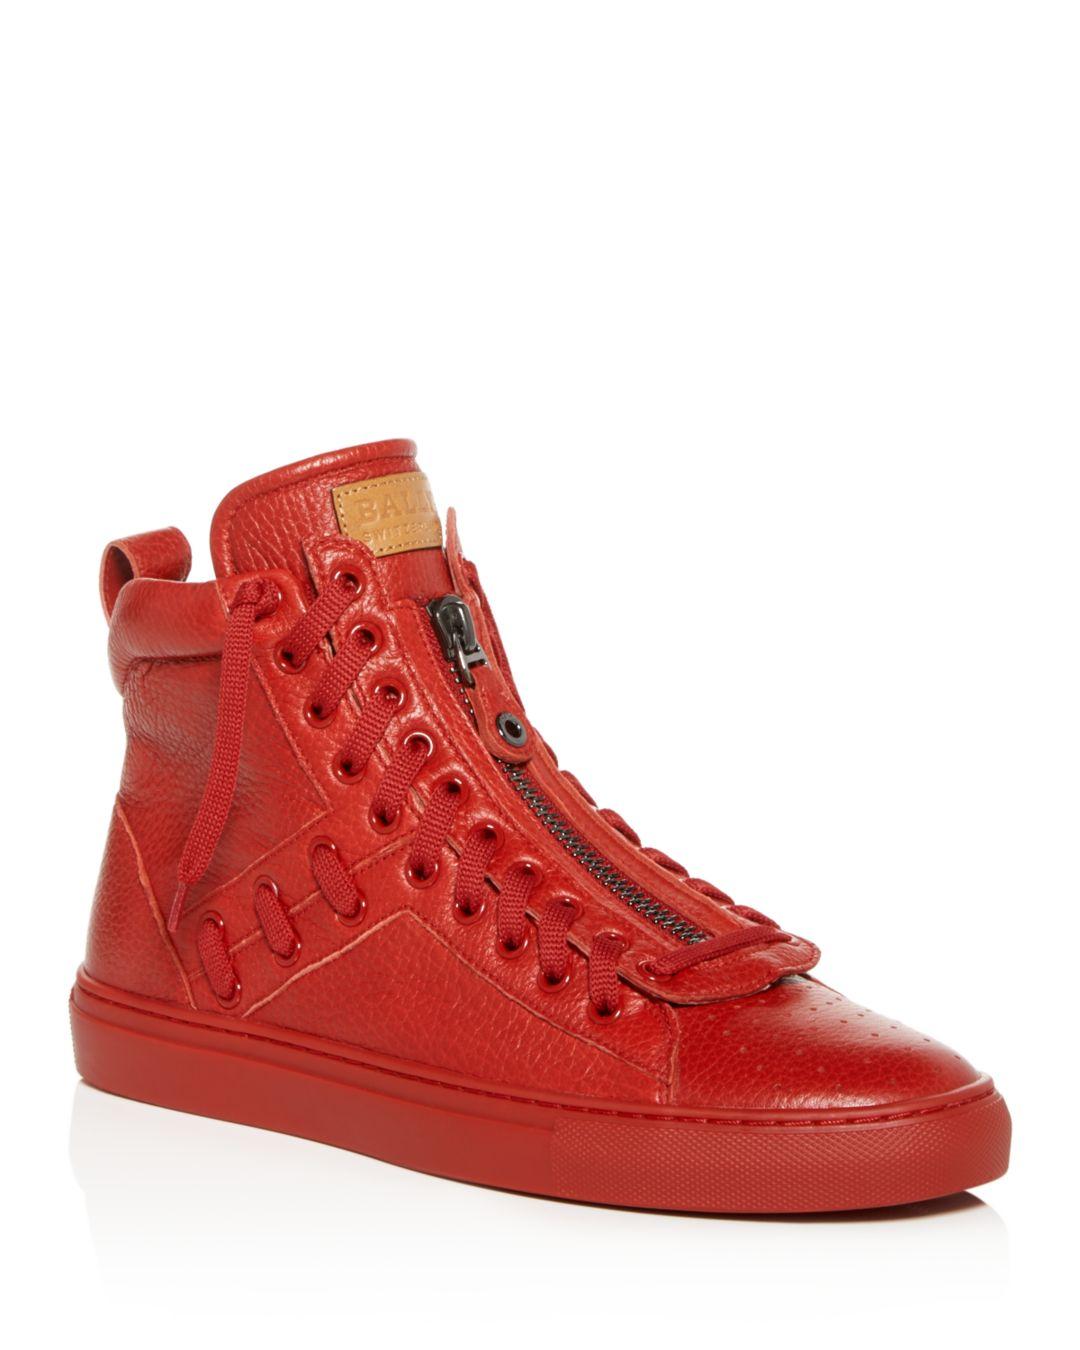 bally shoes red